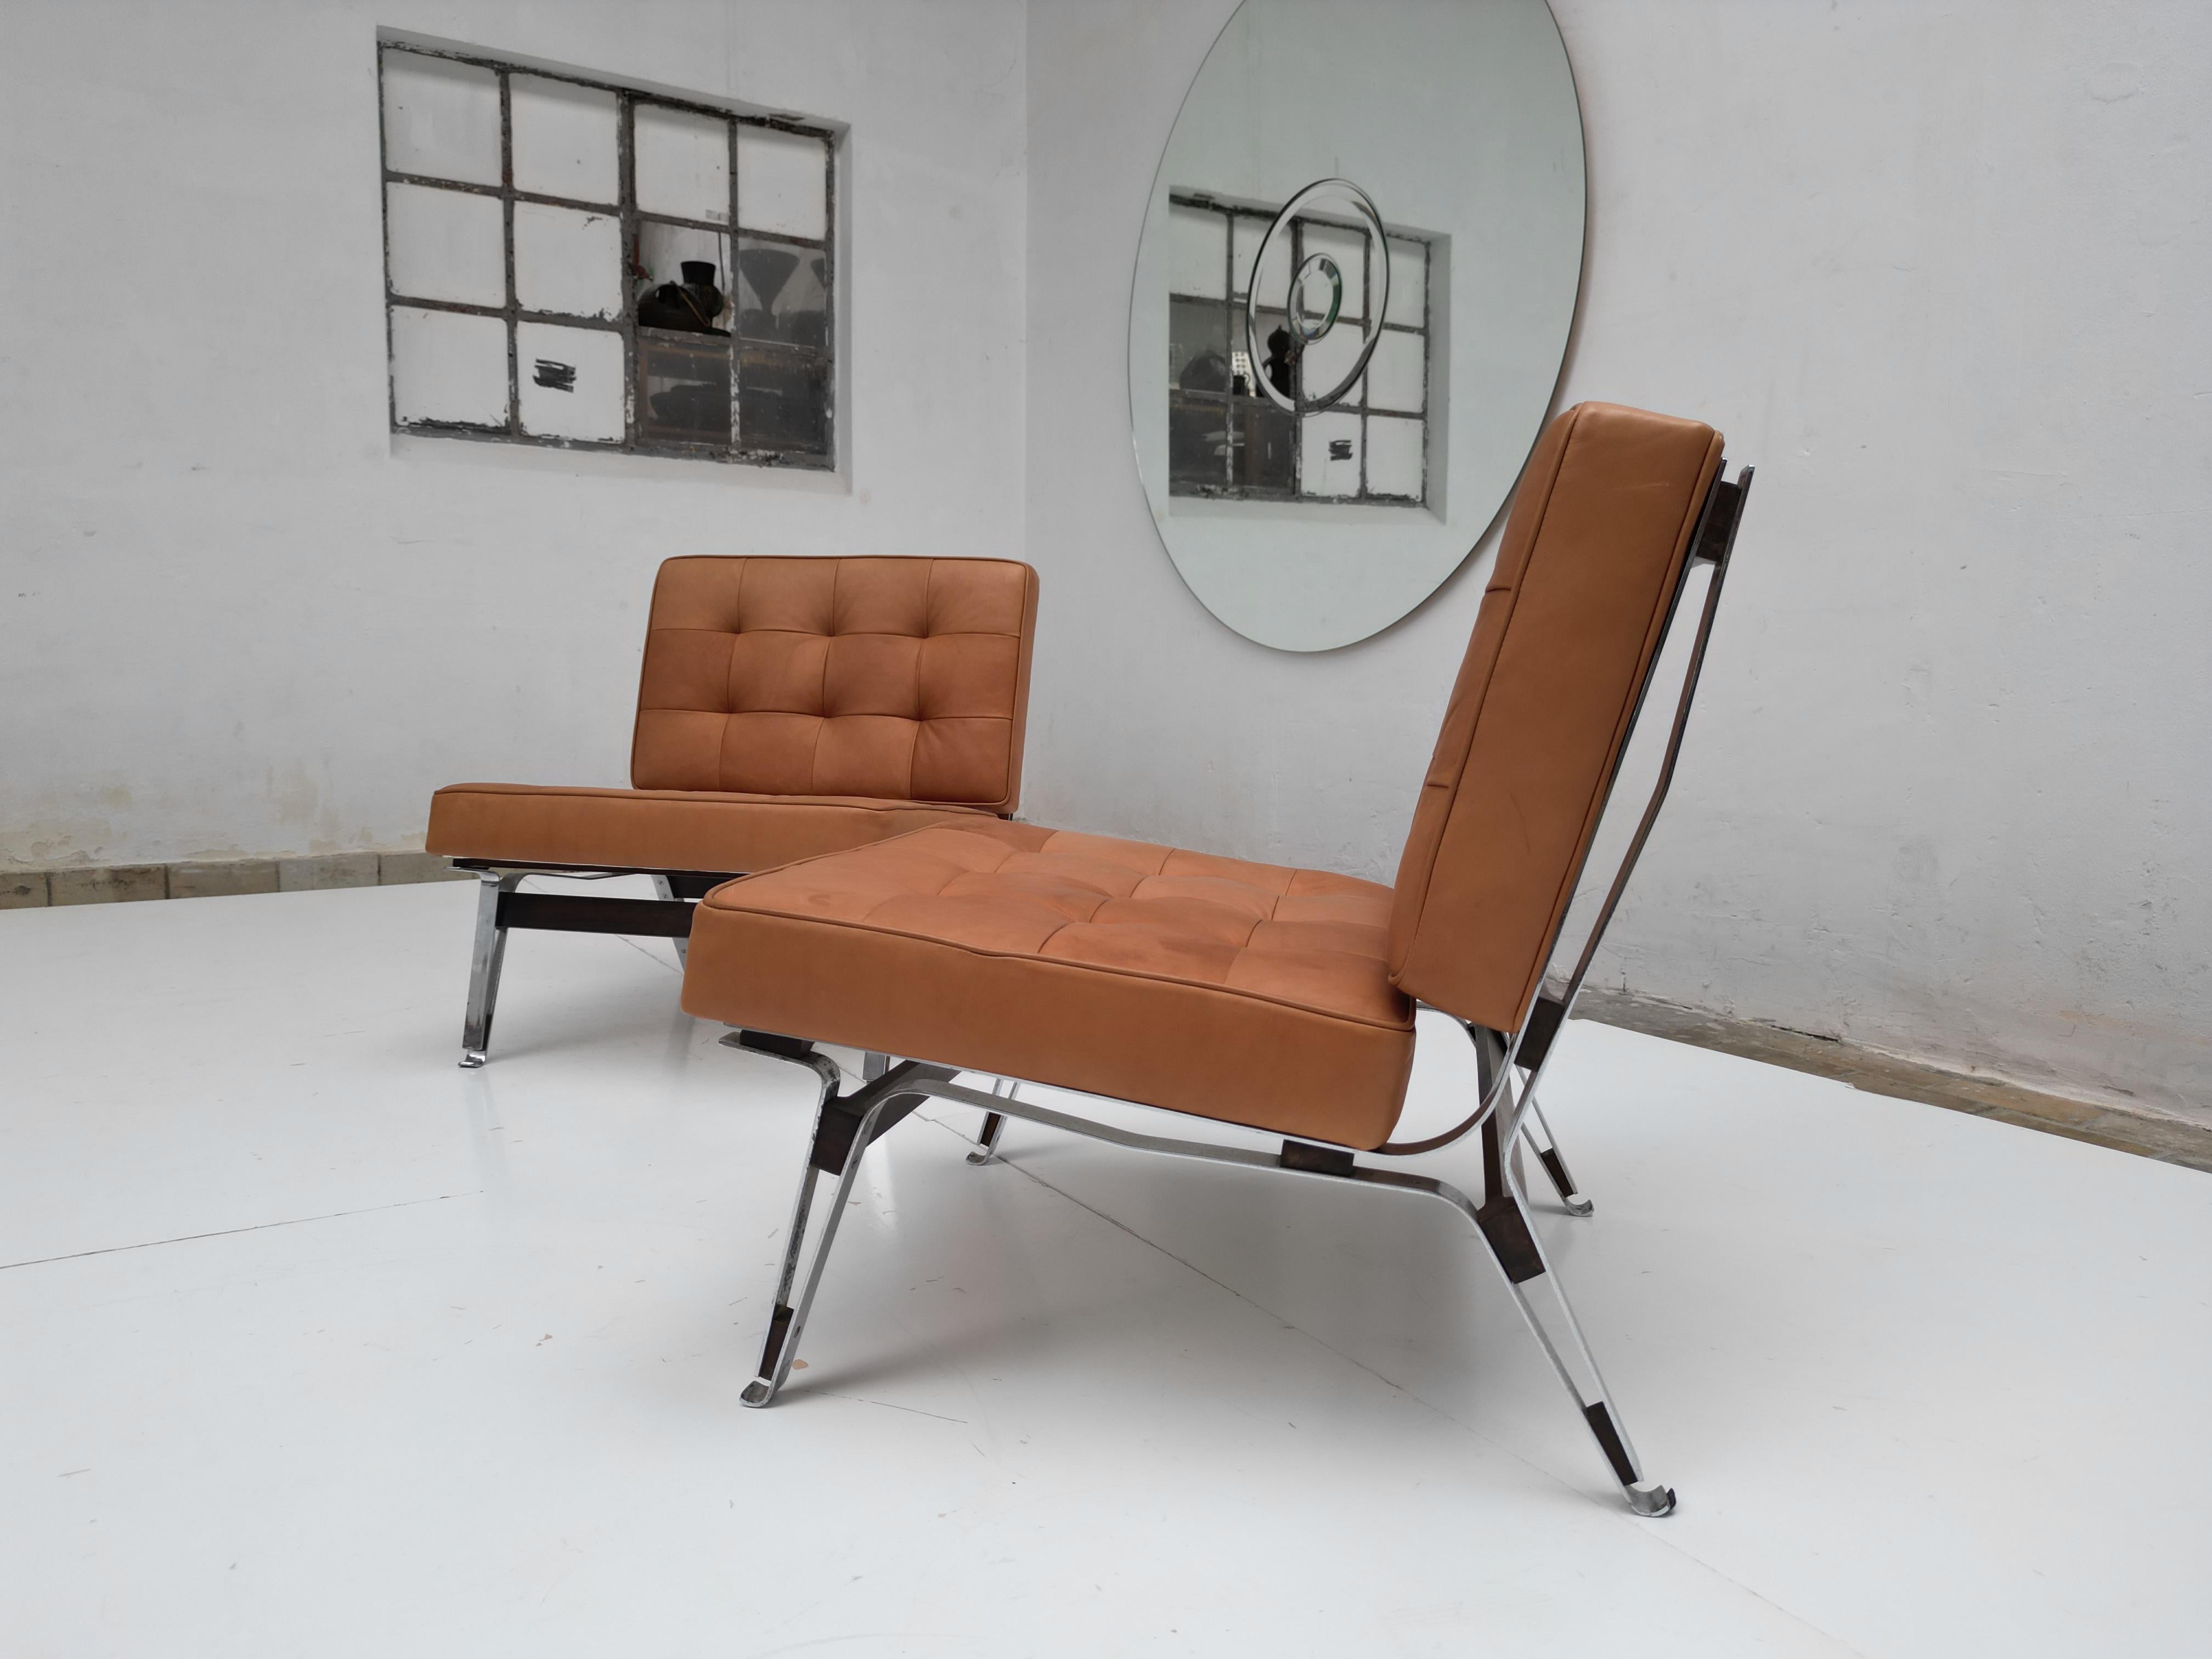 Beautiful Ico Parisi '856' Leather Lounge Chairs, Cassina, 1957 In Good Condition For Sale In bergen op zoom, NL